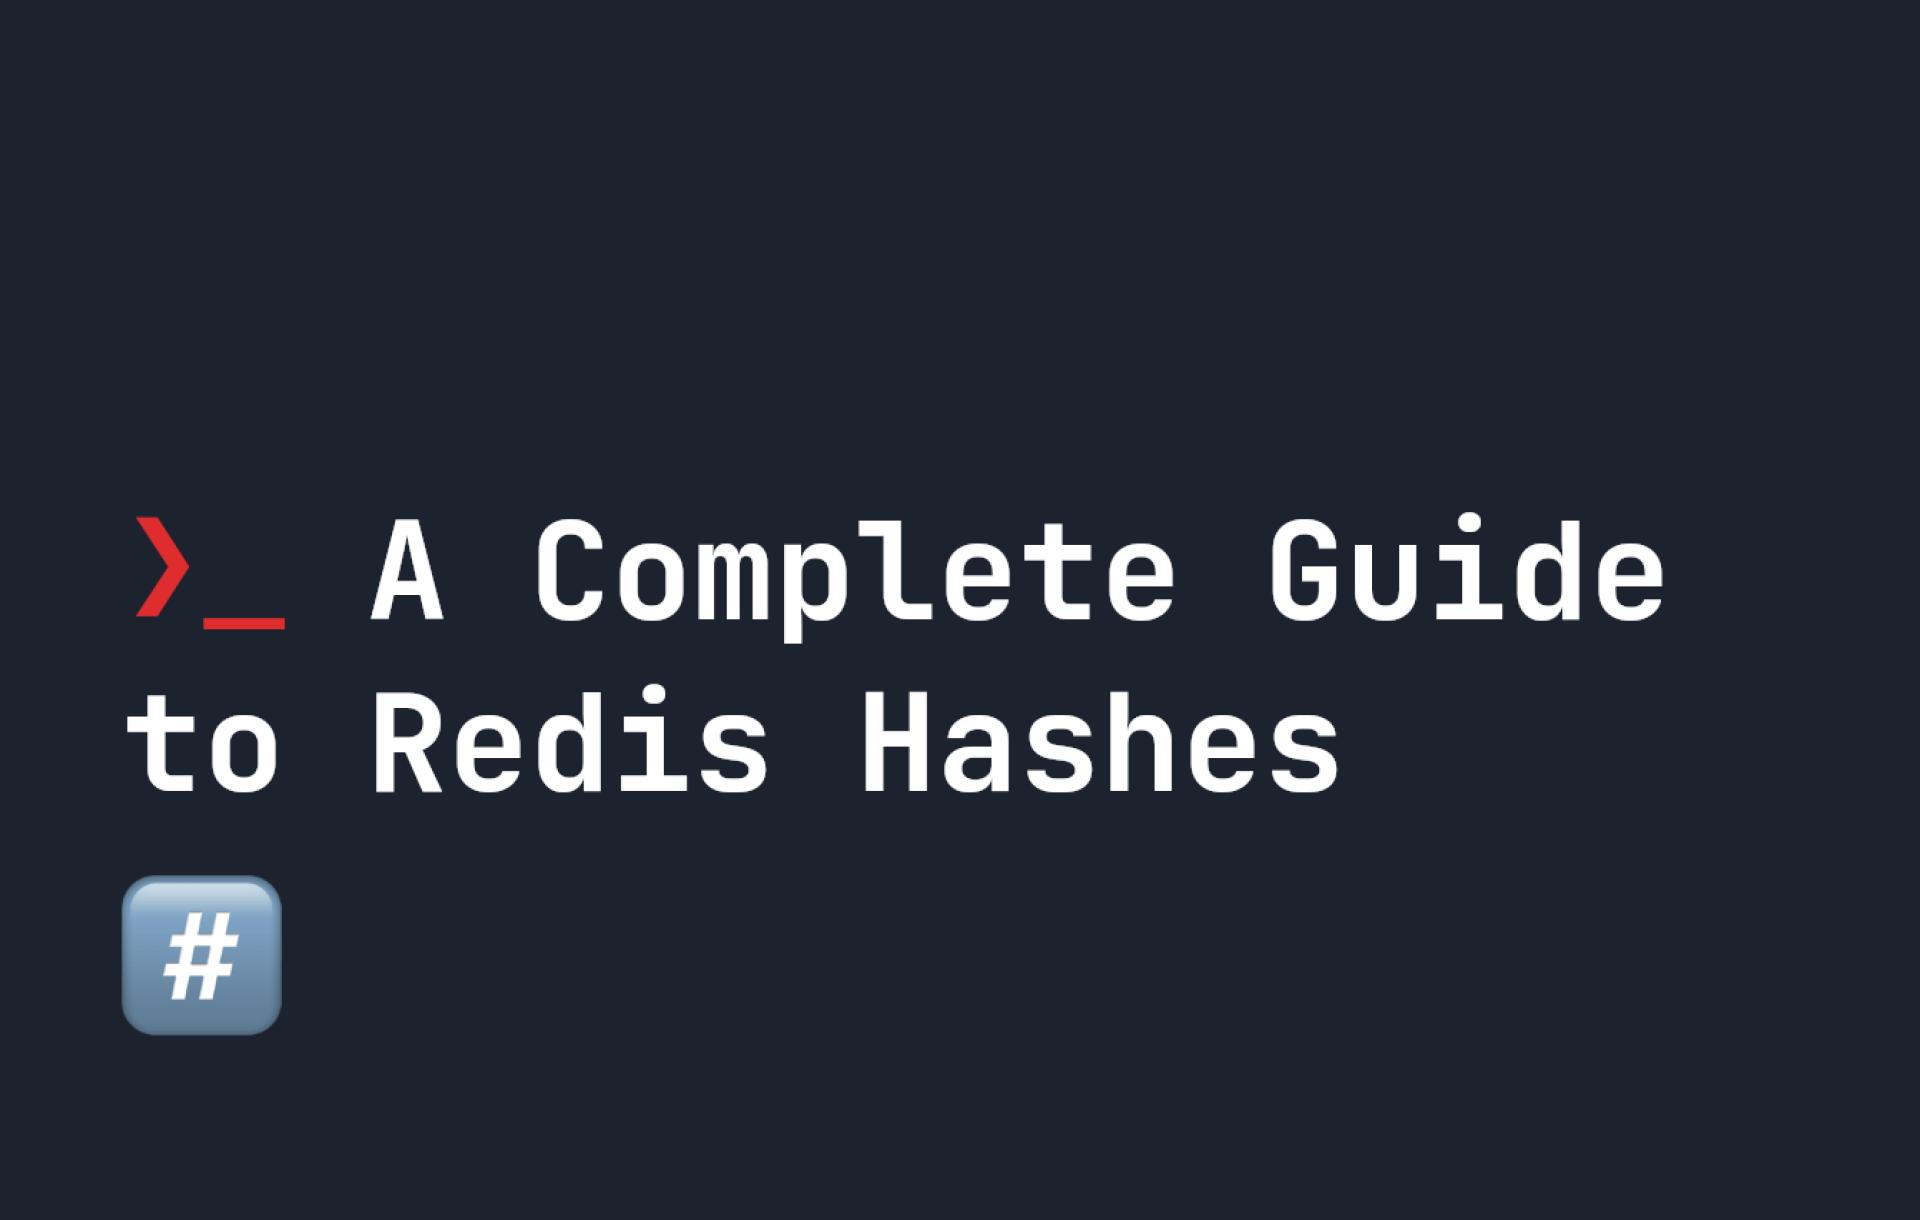 A Complete Guide to Redis Hashes